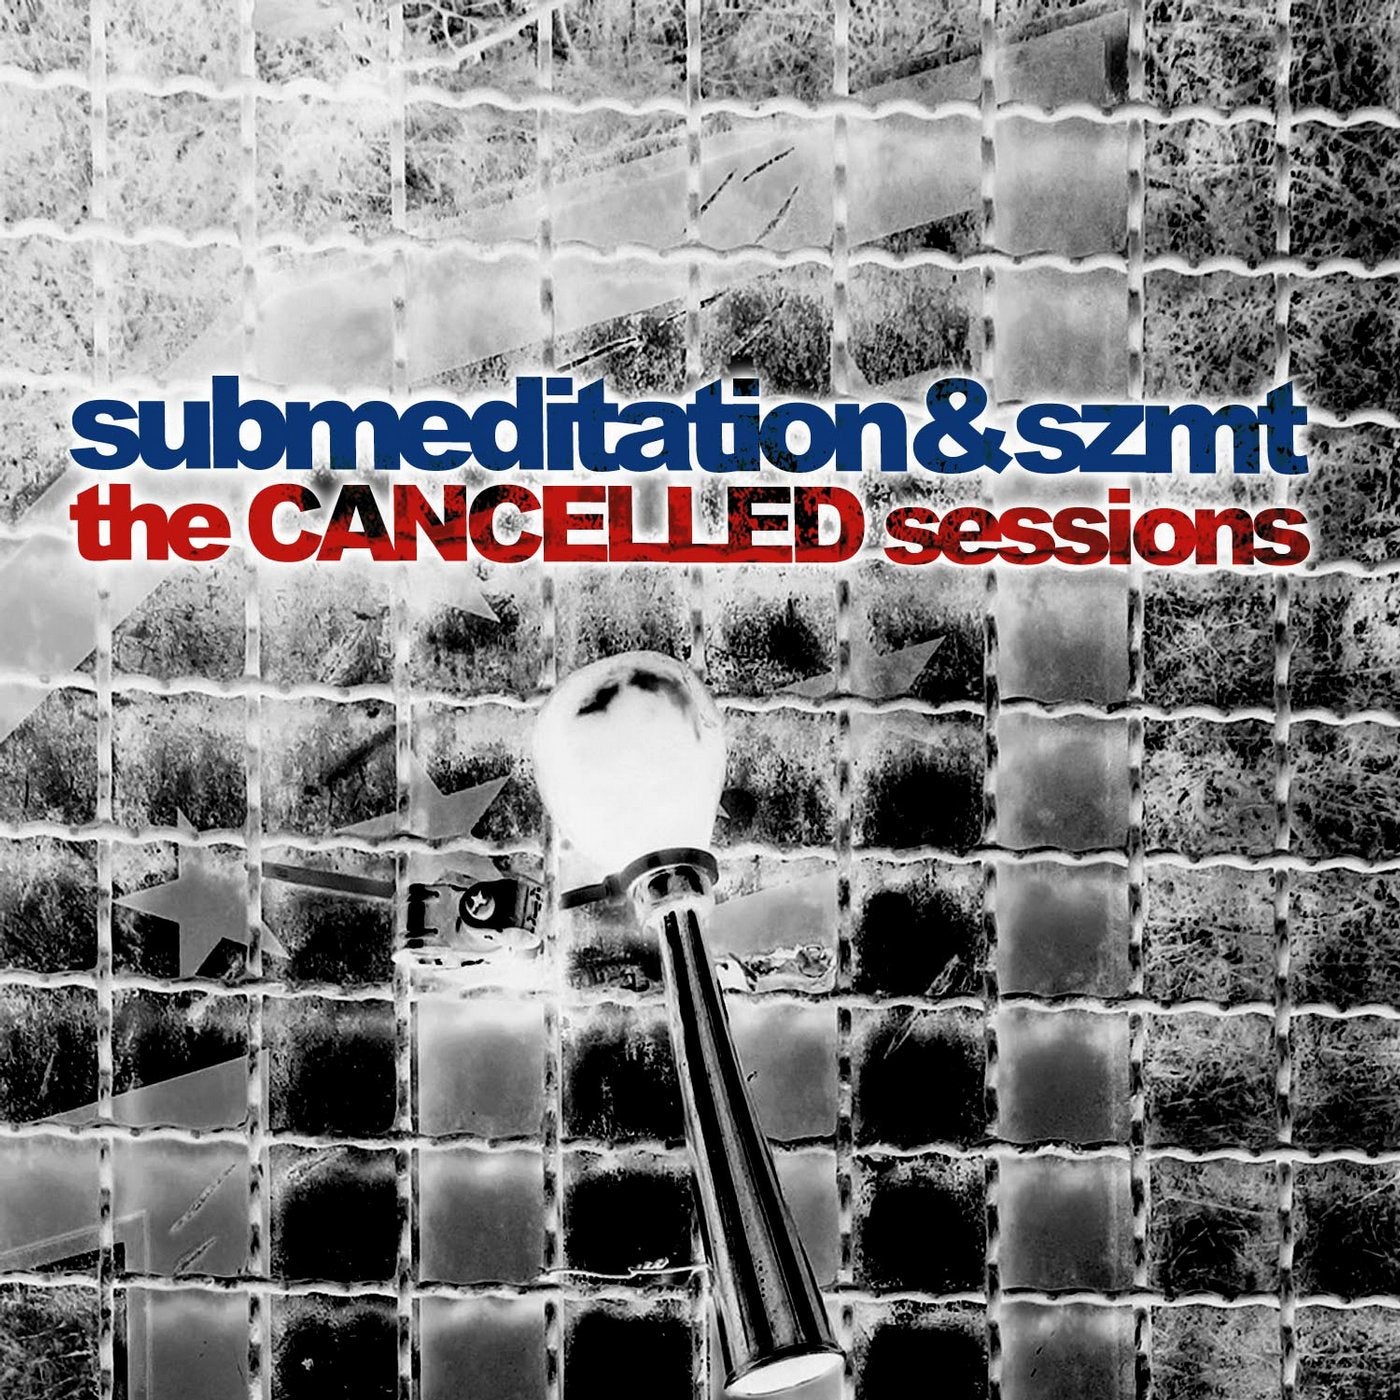 The Cancelled Sessions